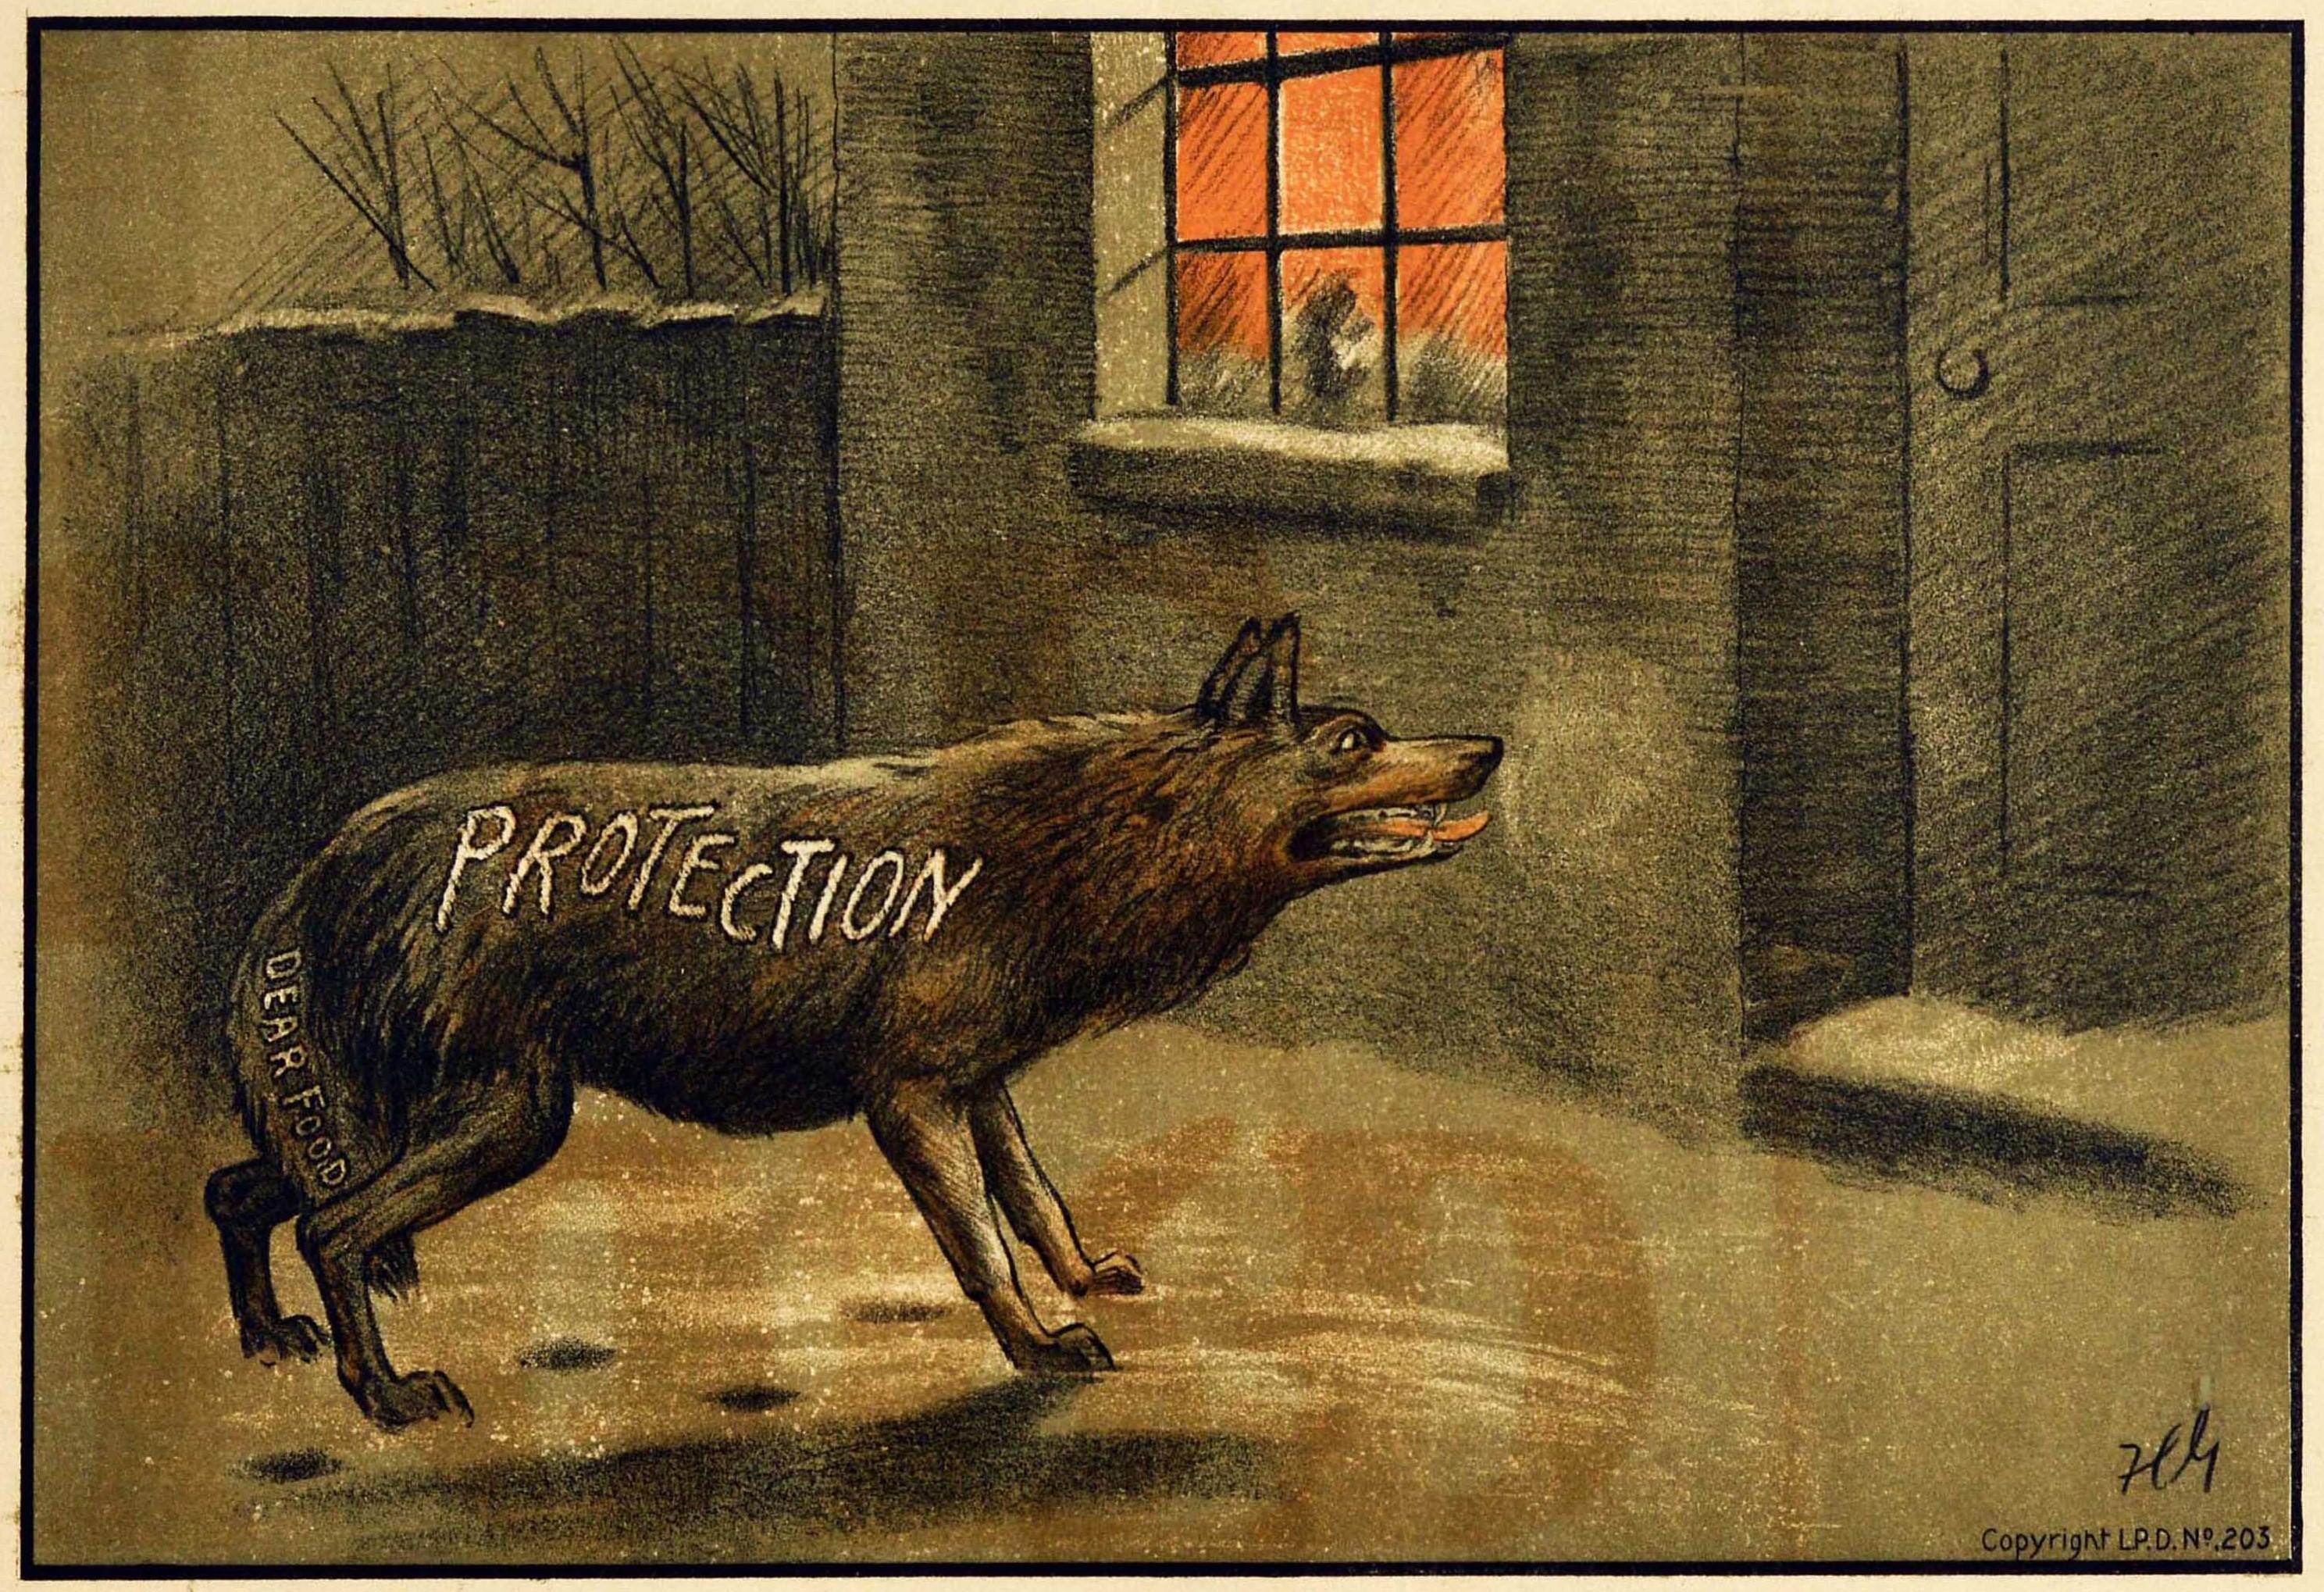 Original antique political election propaganda poster issued by the Liberal Party - Keep the Wolf from the Workman's Door by Sticking to Free Trade - featuring an illustration of a panting wolf with Protection marked on his body and Dear Food